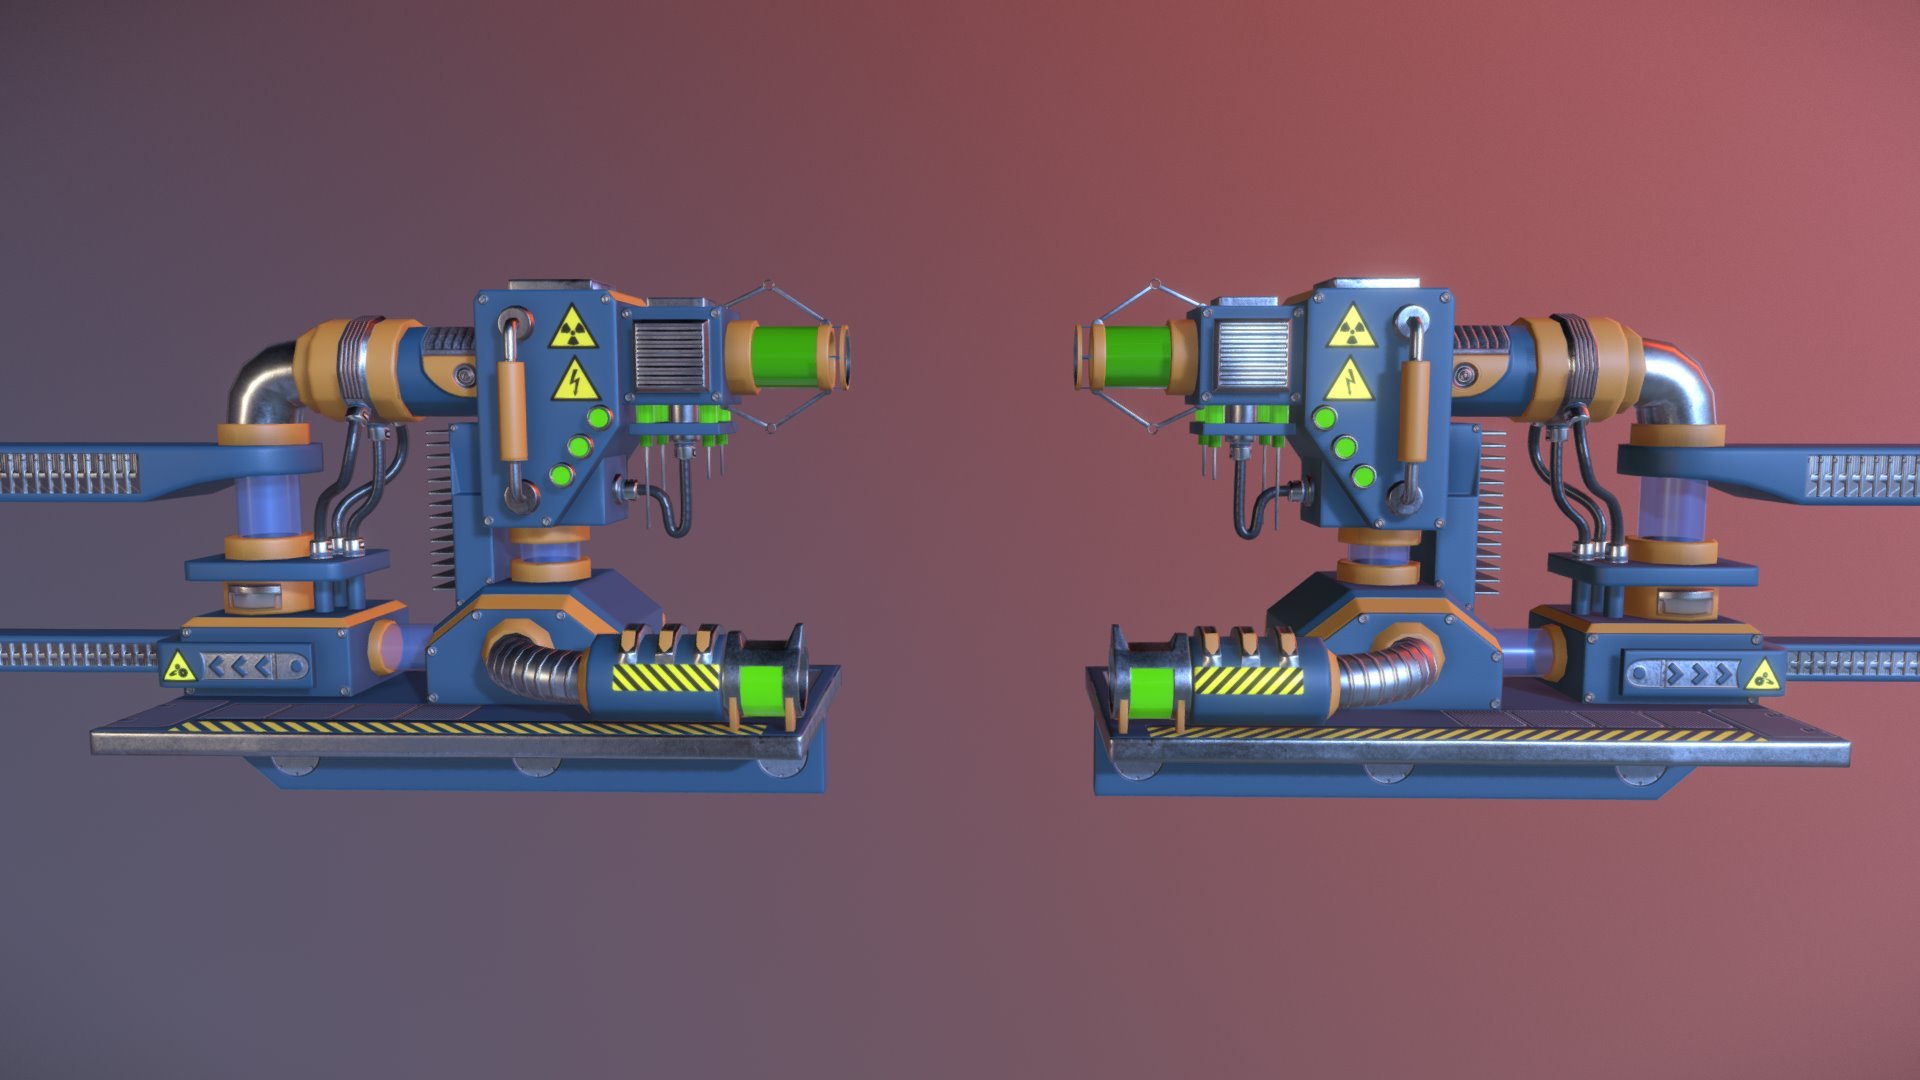 Concept by Slav S.
This is an asset for a game I am currently working on. Its a &ldquo;reactor